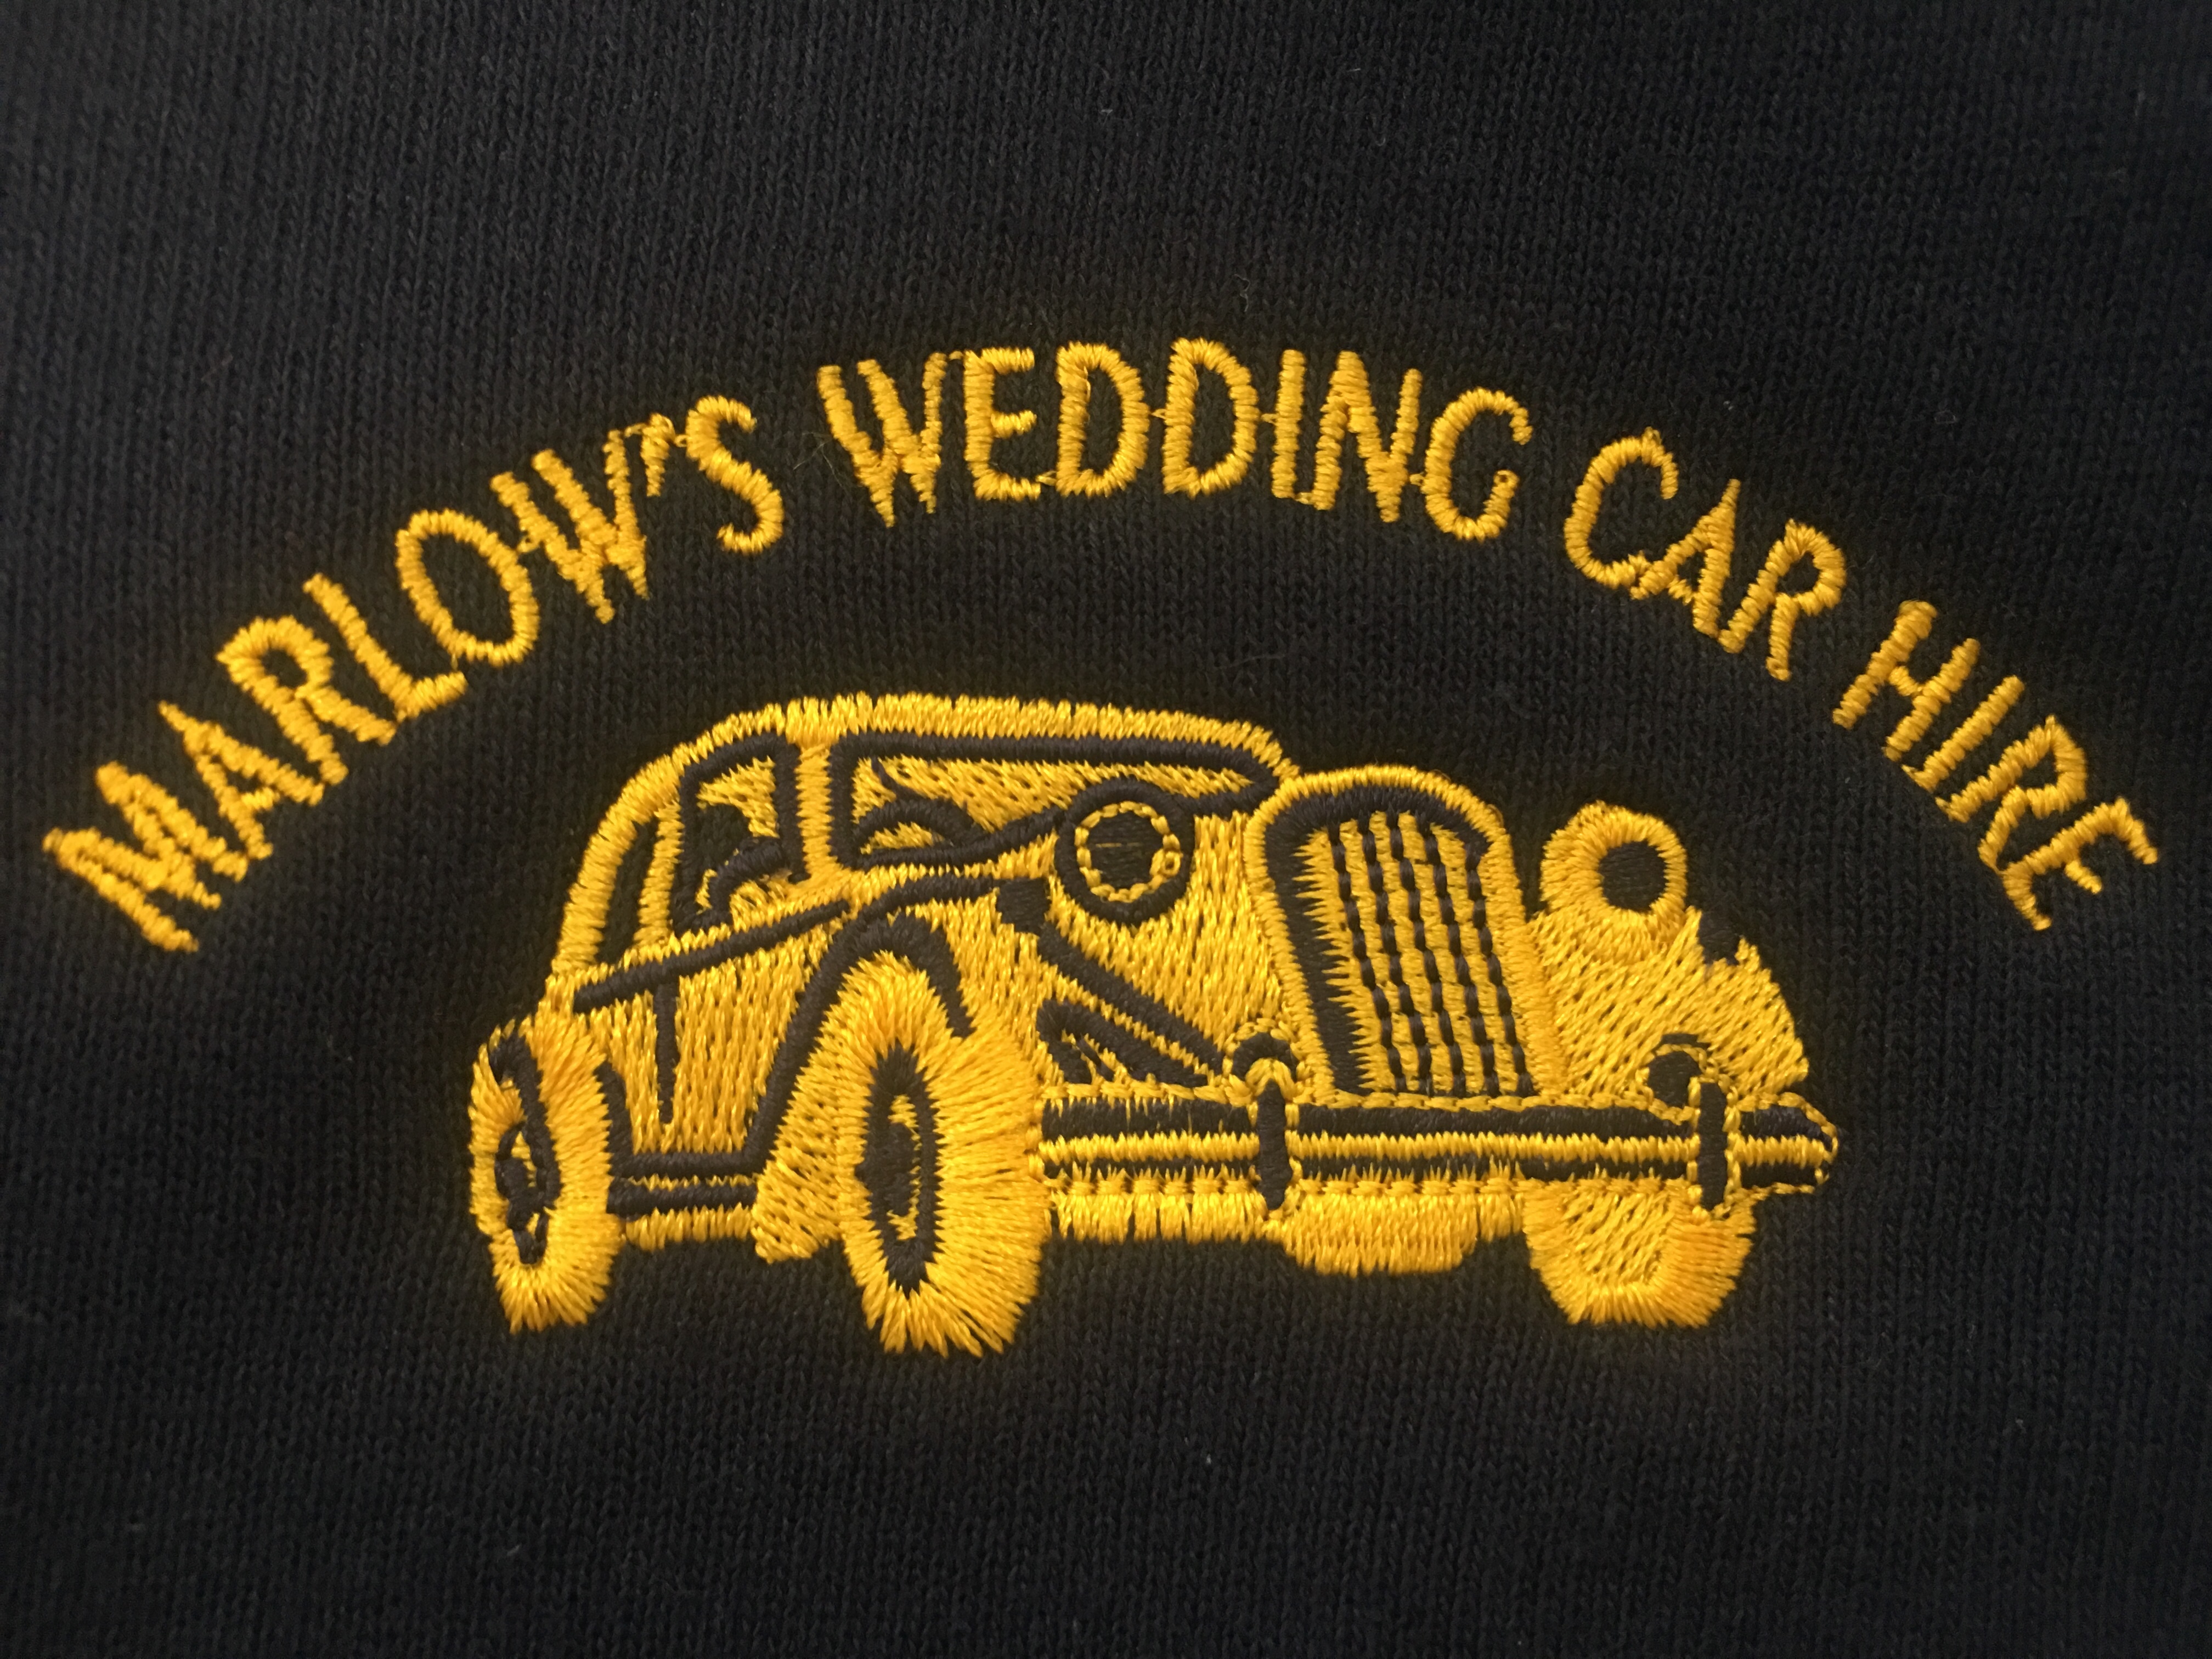 Embroidery_Marlow's_Wedding_Car_Hire_Pulse